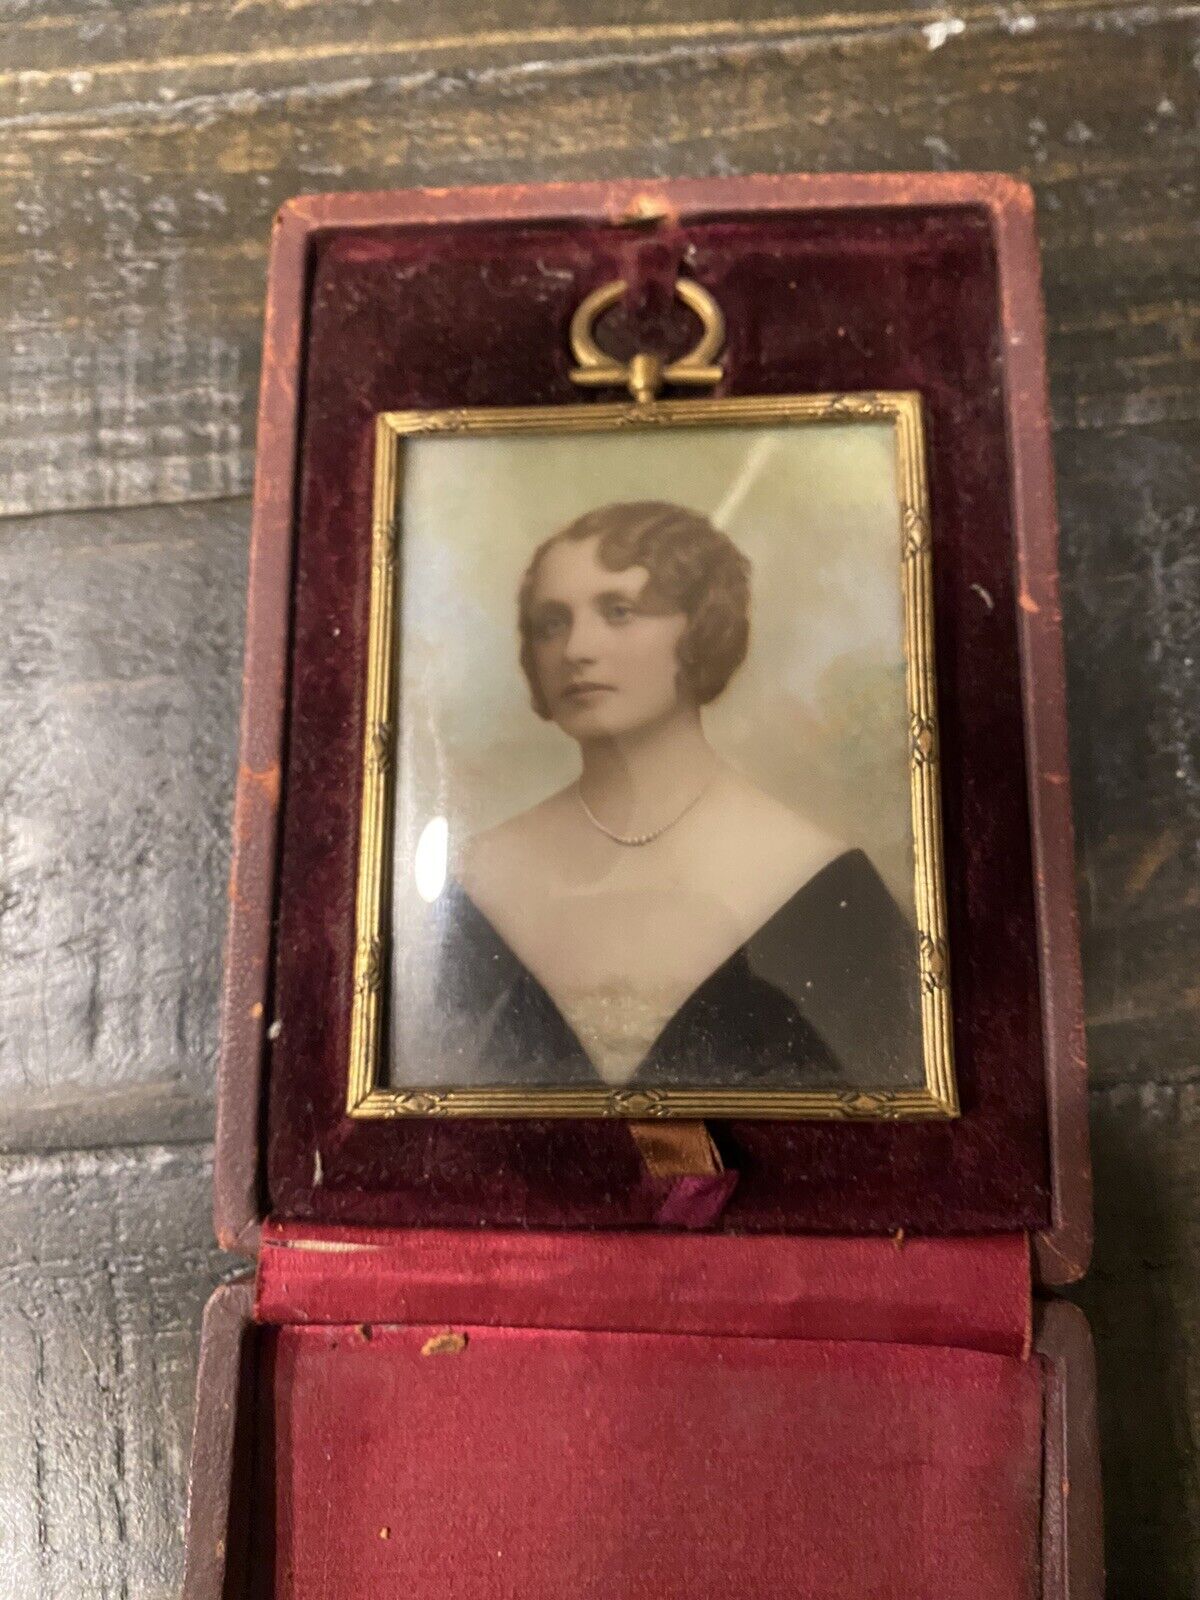 antique portrait In Leather Carrying Case Lined With Velvet Women Photography